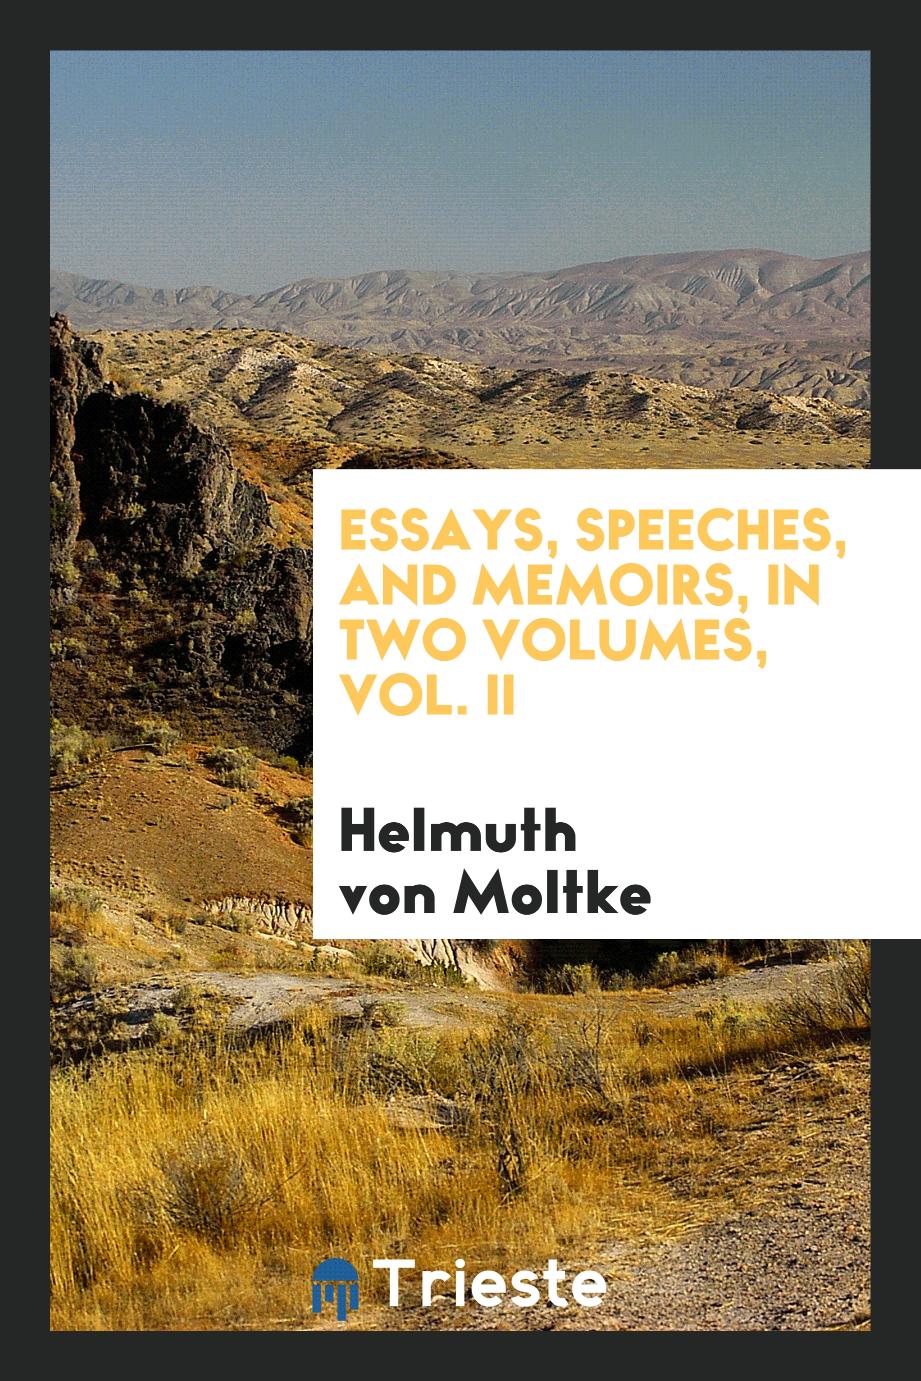 Essays, speeches, and memoirs, in two volumes, Vol. II